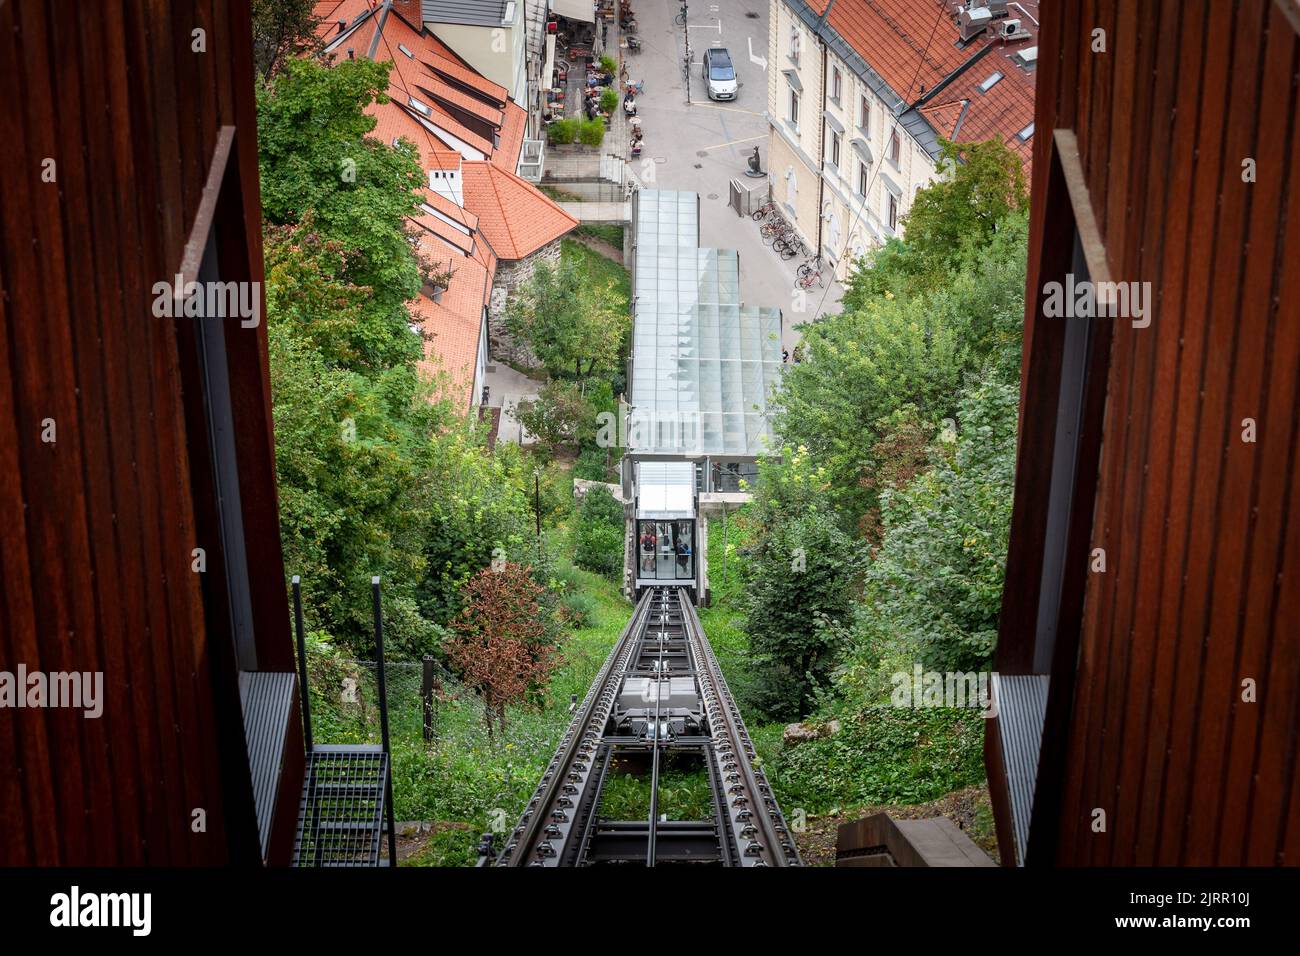 Picture of the ljubljana funicular. The Ljubljana Castle Funicular is a funicular railway in Ljubljana, the capital of Slovenia. It goes from Krek Squ Stock Photo